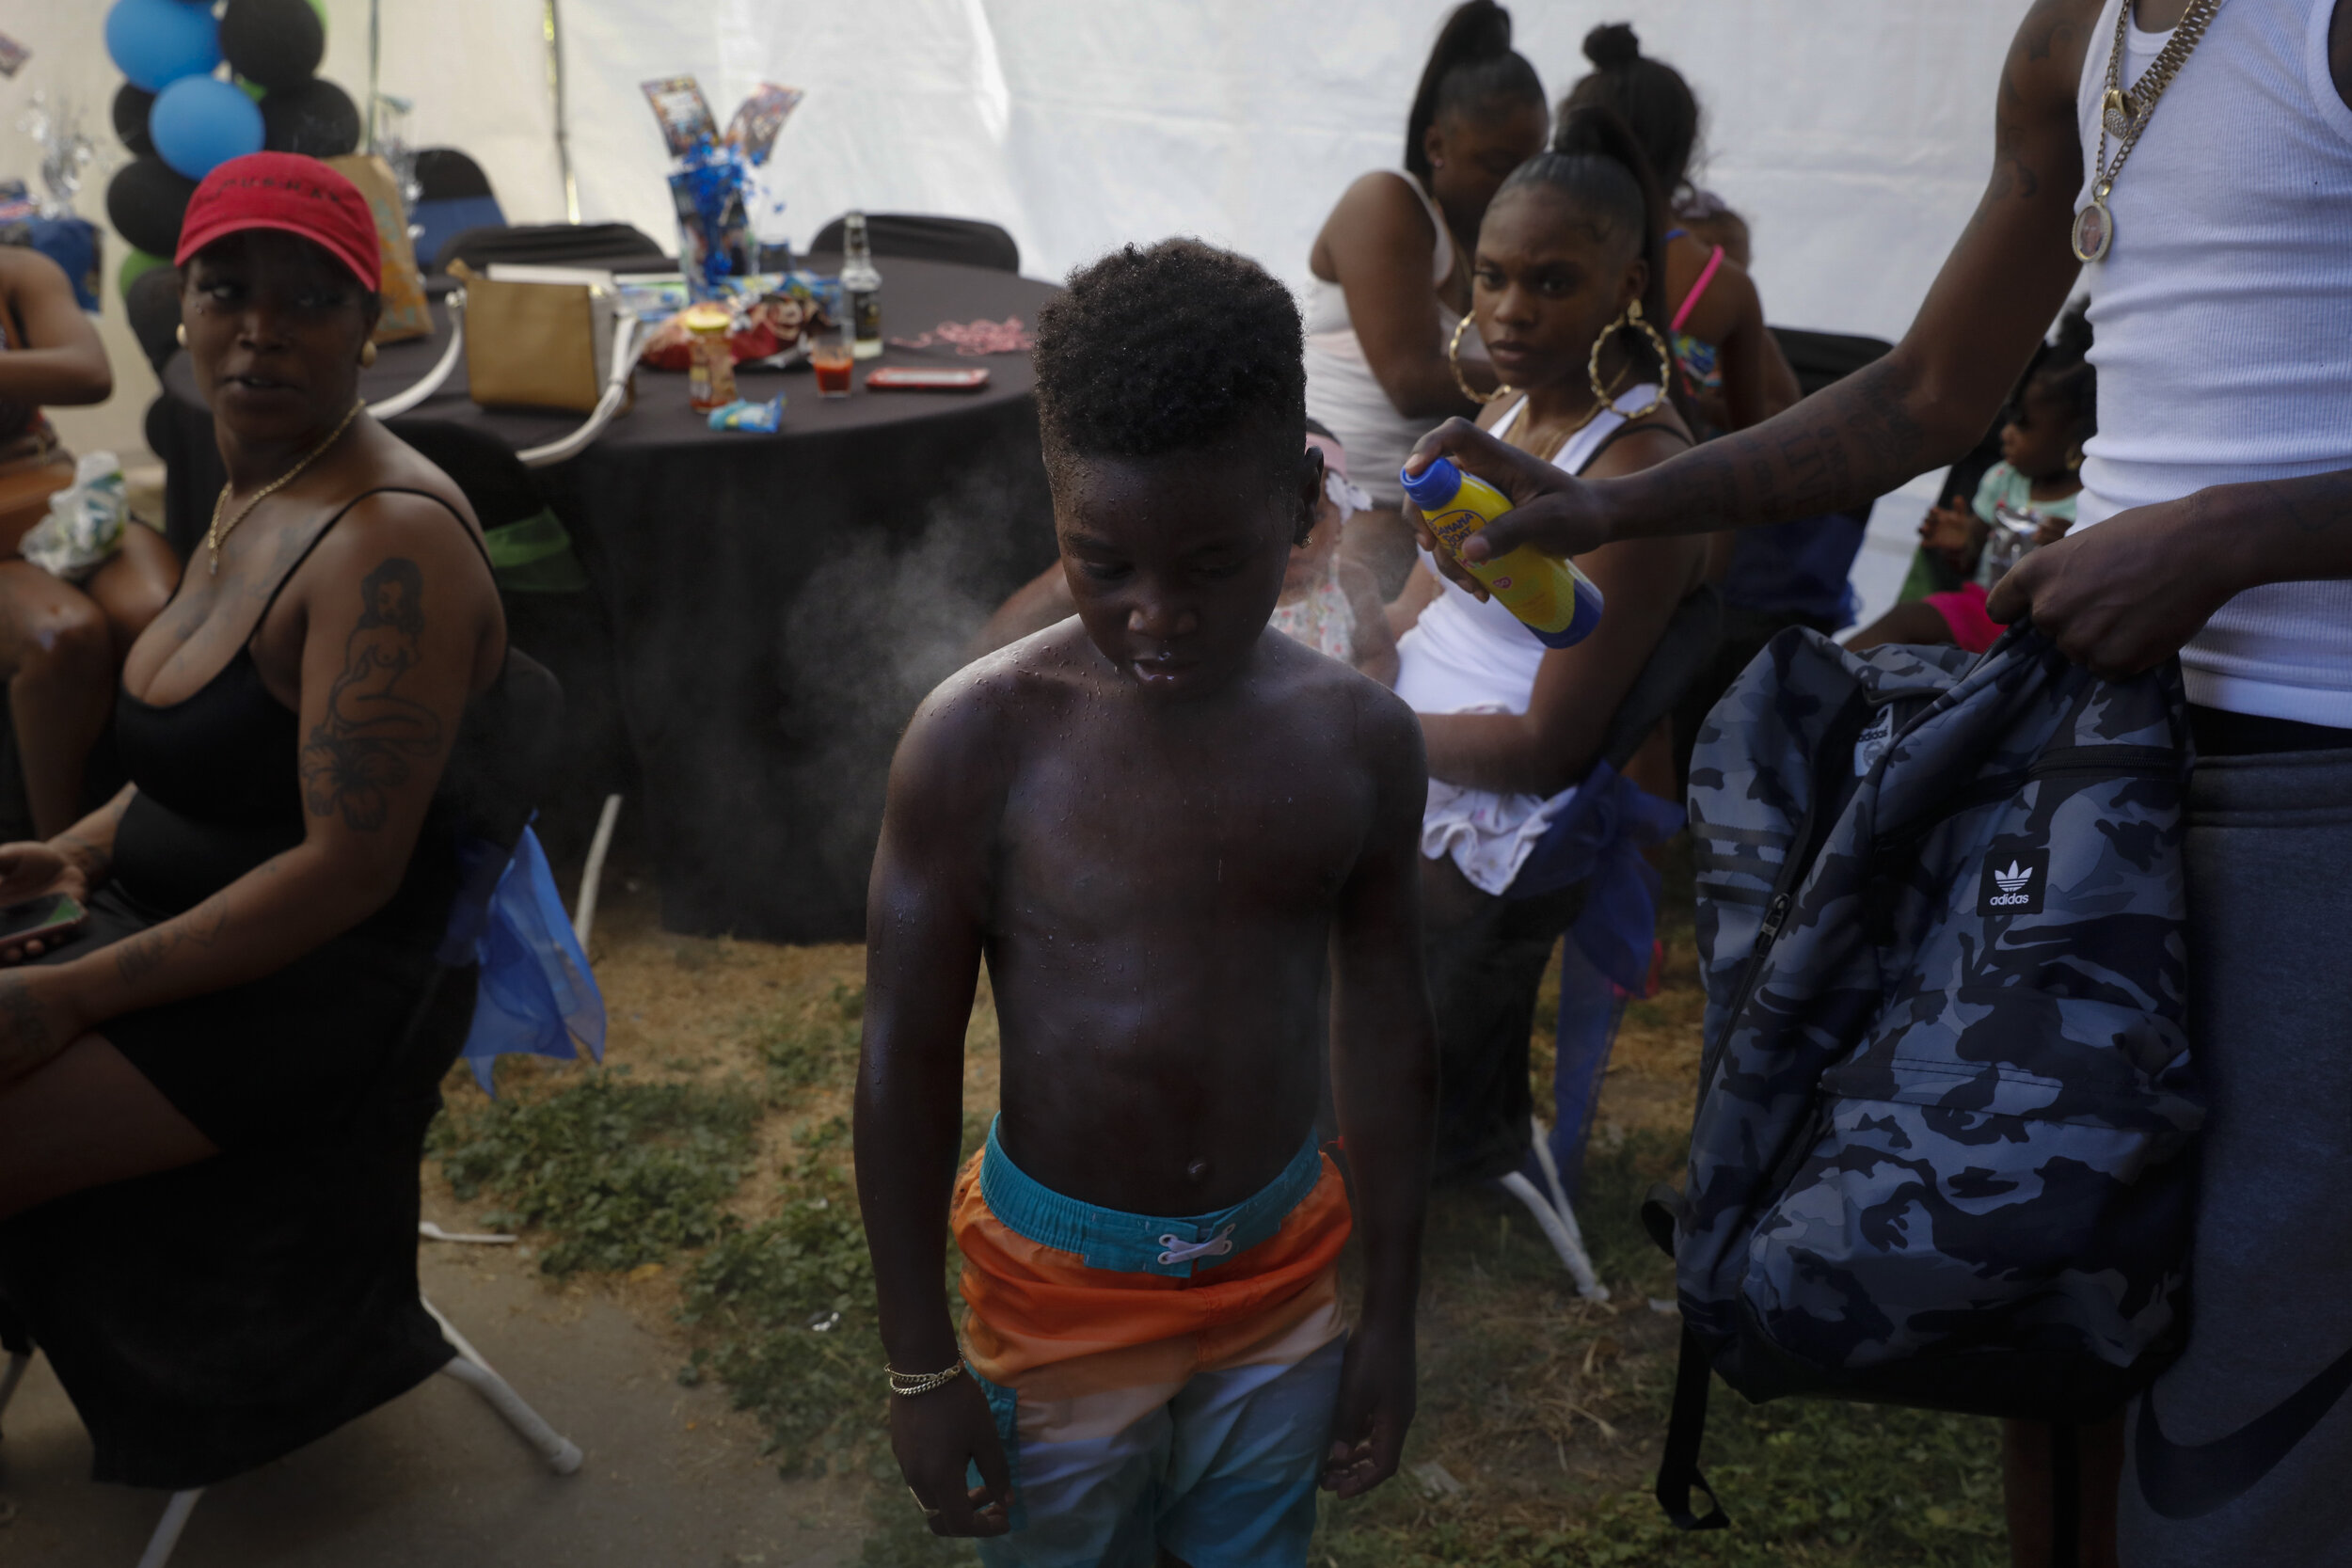  Emmett Palmer, right sprays sunscreen on Iron Grim, 6, as tenants gather for a birthday party at the Nickerson Gardens housing project in the Watts neighborhood of Los Angeles, Wednesday, June 10, 2020. (AP Photo/Jae C. Hong) 